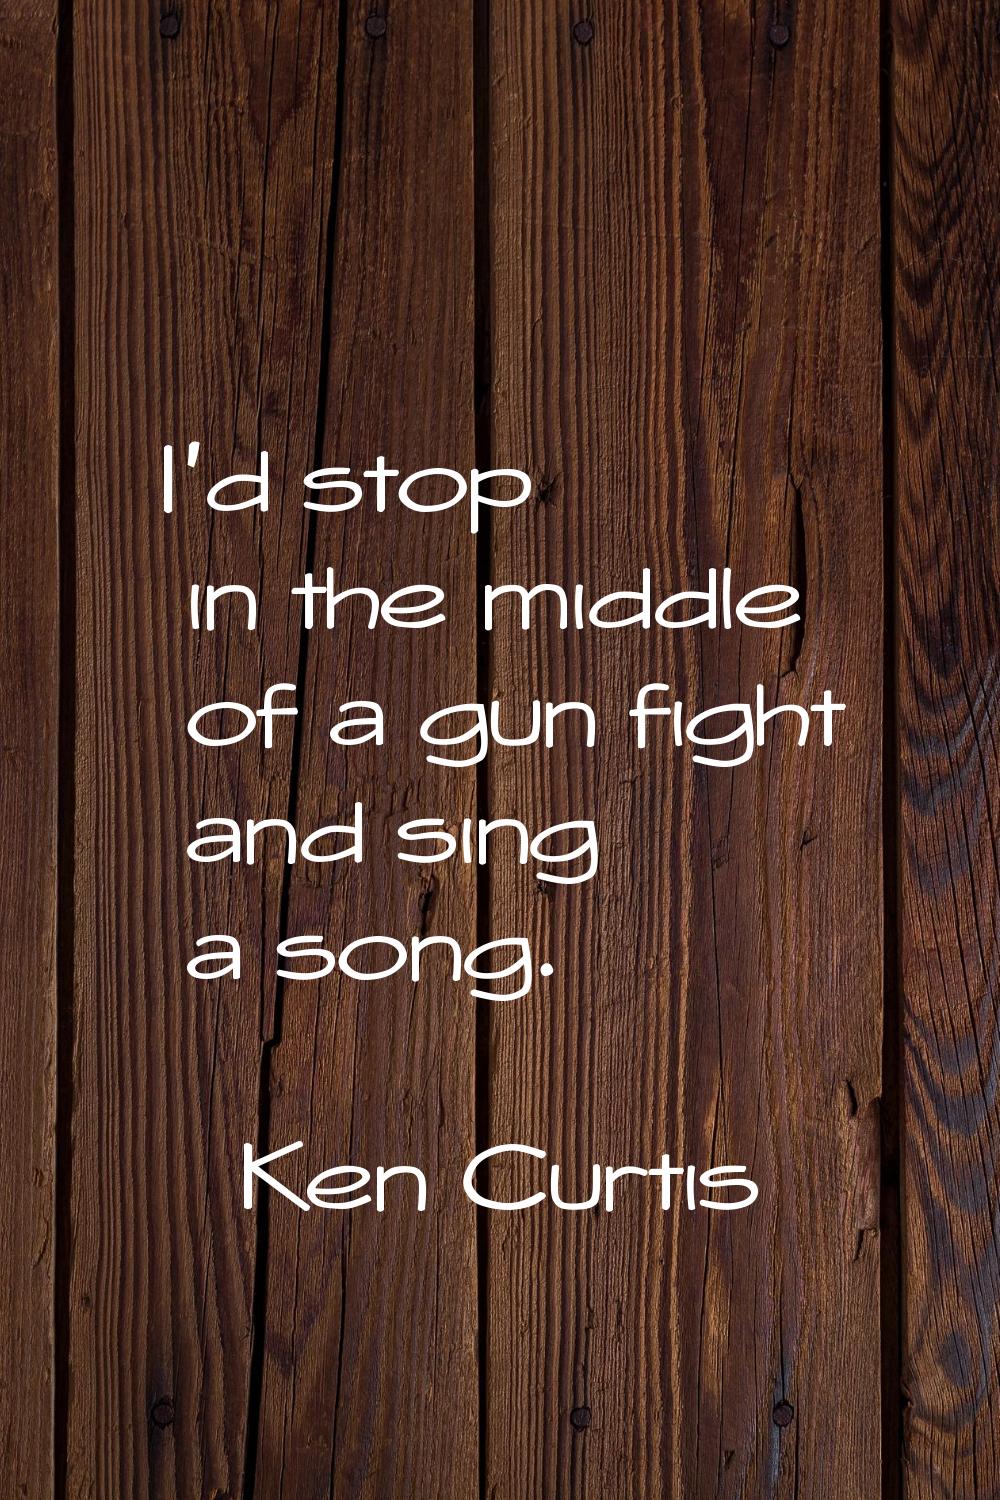 I'd stop in the middle of a gun fight and sing a song.